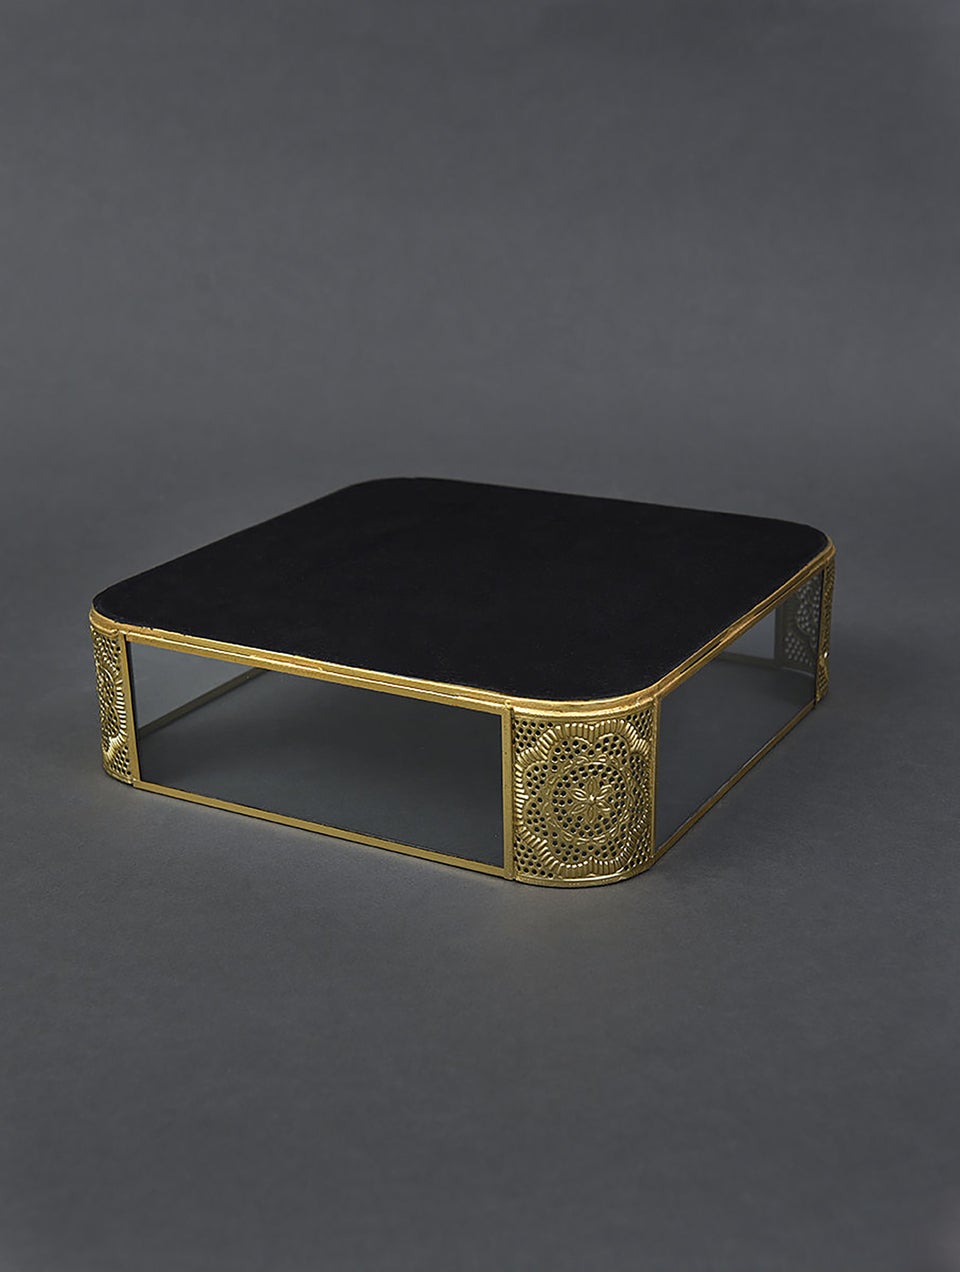 Handcrafted Metal And Glass Decorative Tray